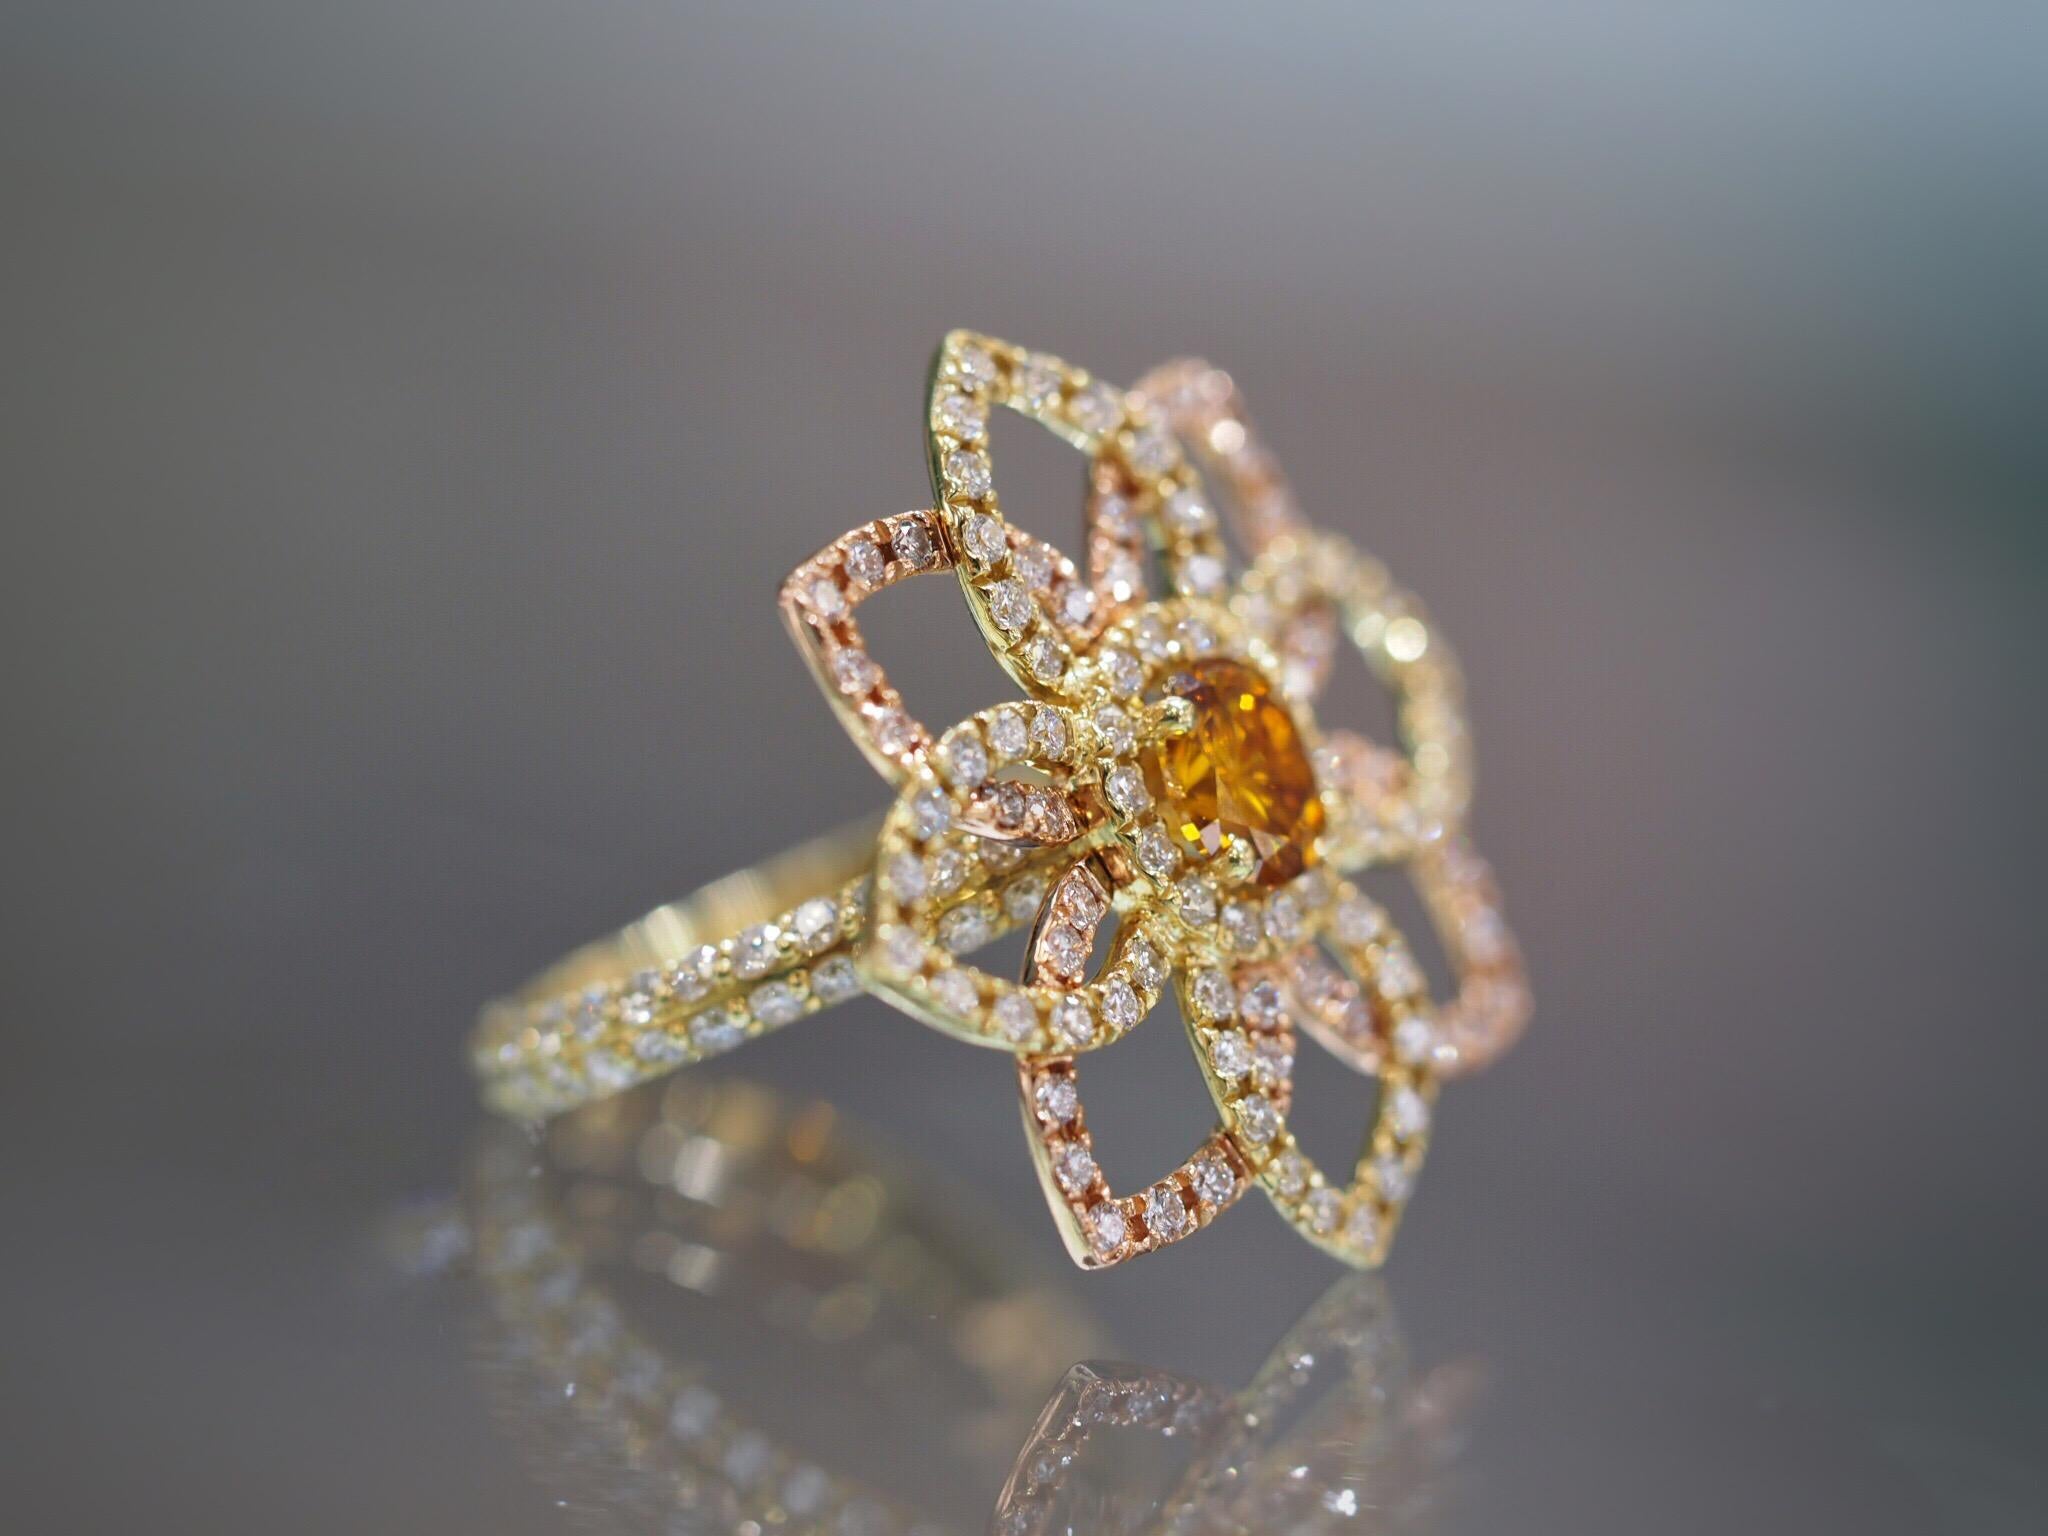 This custom made flower ring includes a 0.72ct orange oval diamond center set in a stunning nature inspired flower design ring. There are 1.56ctw of round brilliant cut diamonds accented on the leaves and down the sides of the ring. It is 18k rose